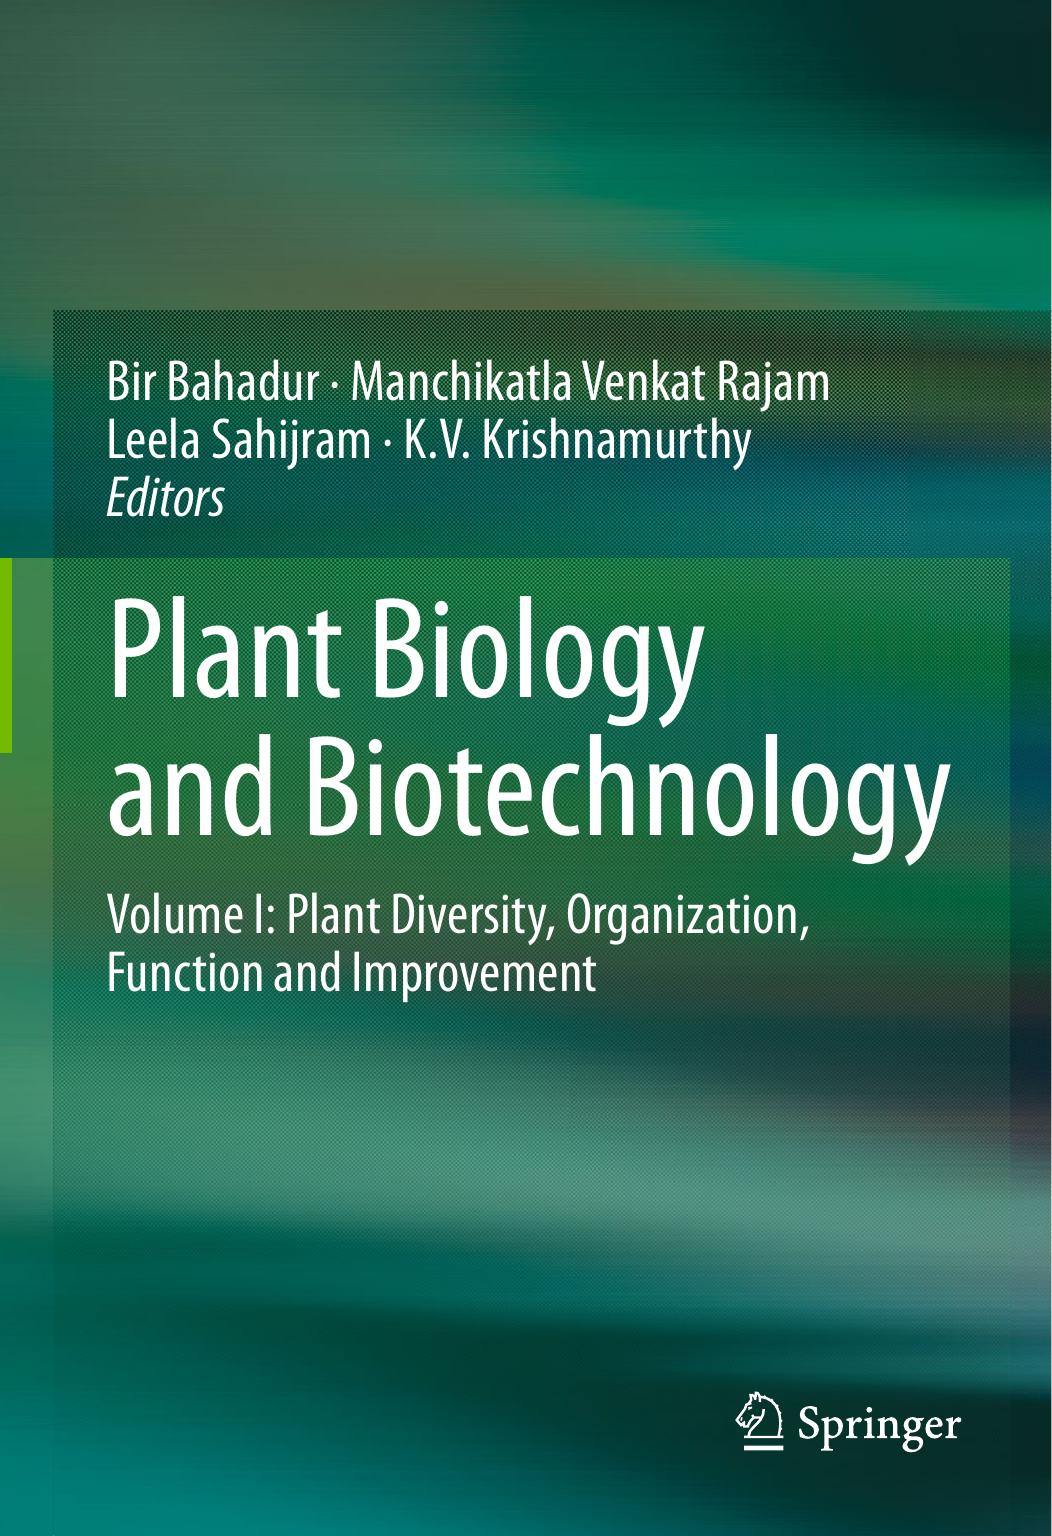 Plant Biology and Biotechnology  Volume I  Plant Diversity, Organization, Function and Improvement ( PDFDrive ) (1), 2015